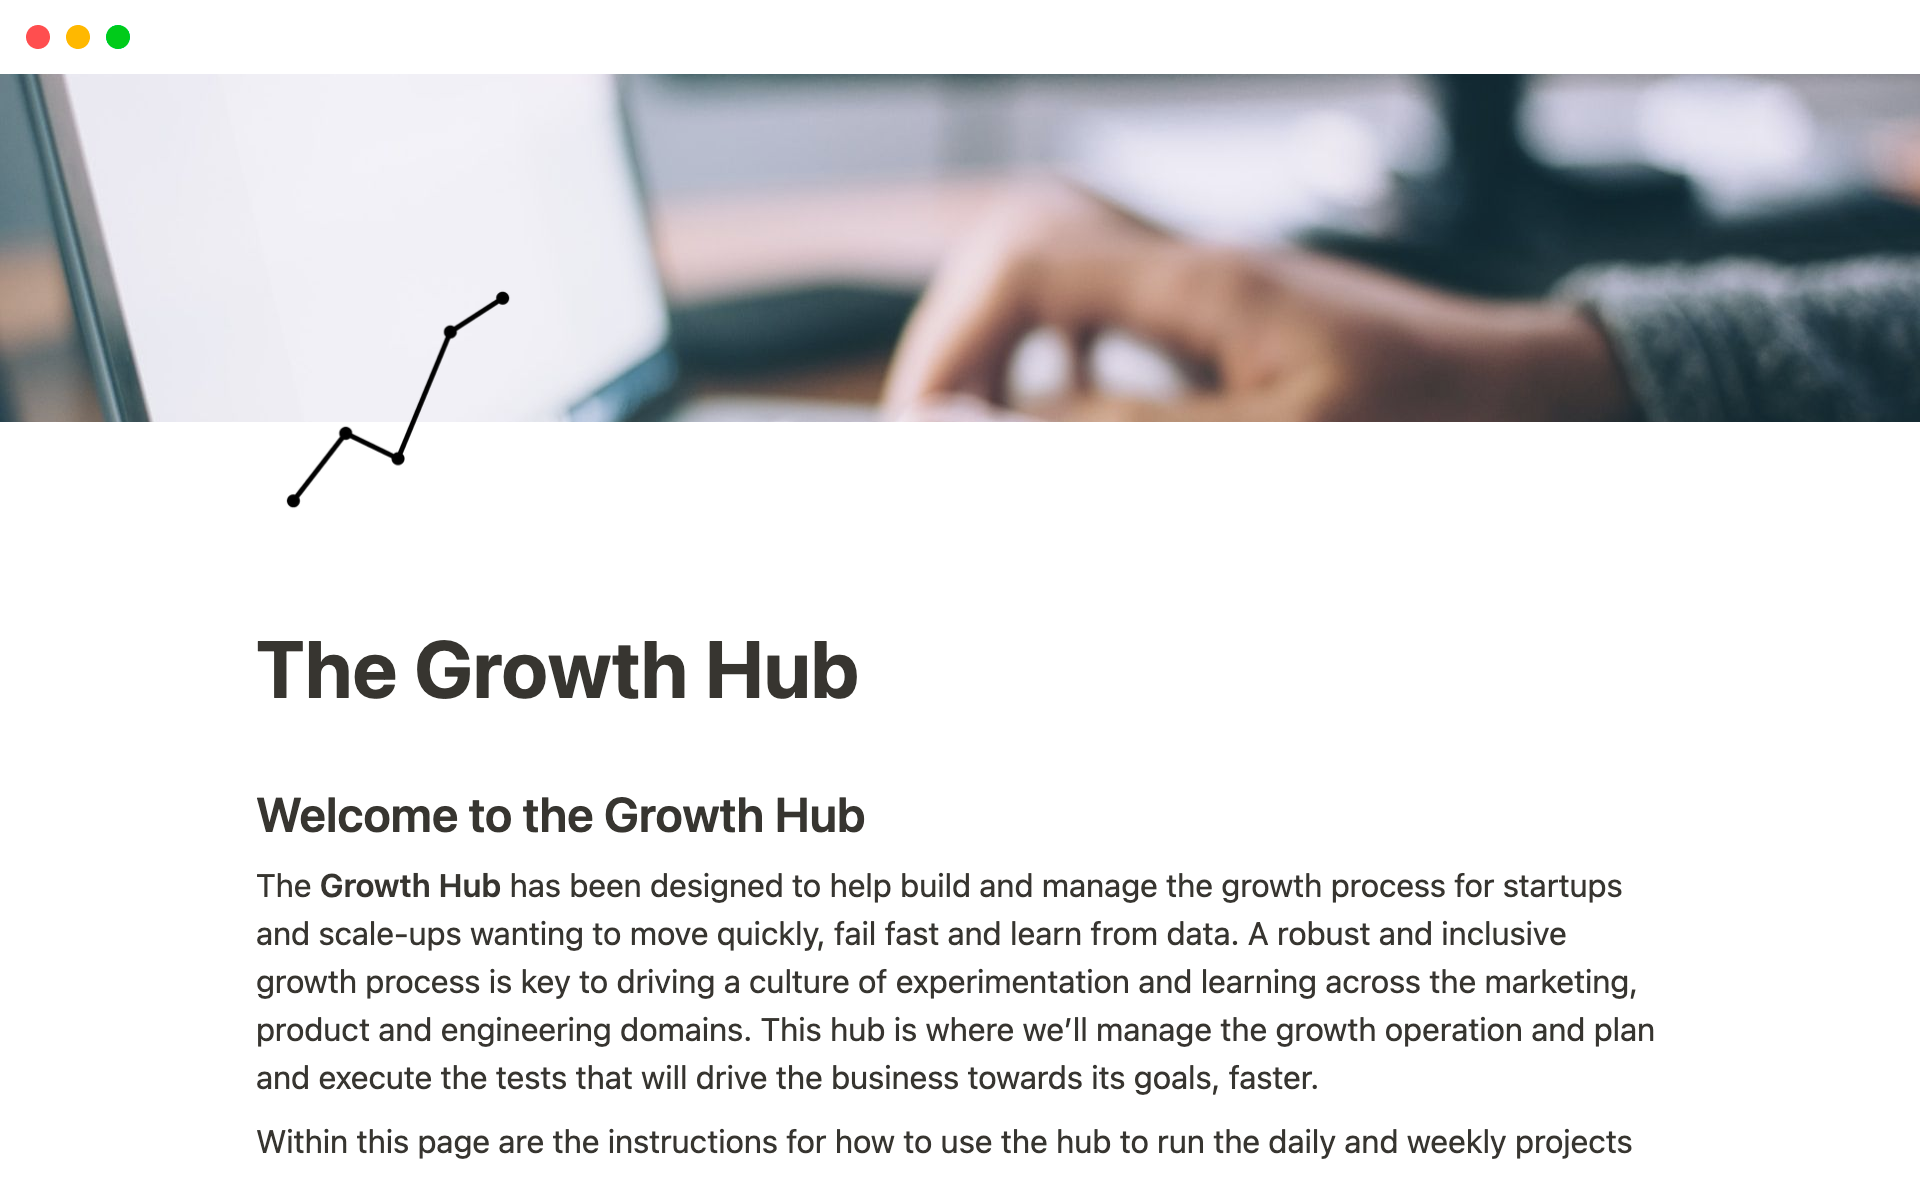 One-stop-shop for designing, prioritising and launching growth experiments for startups